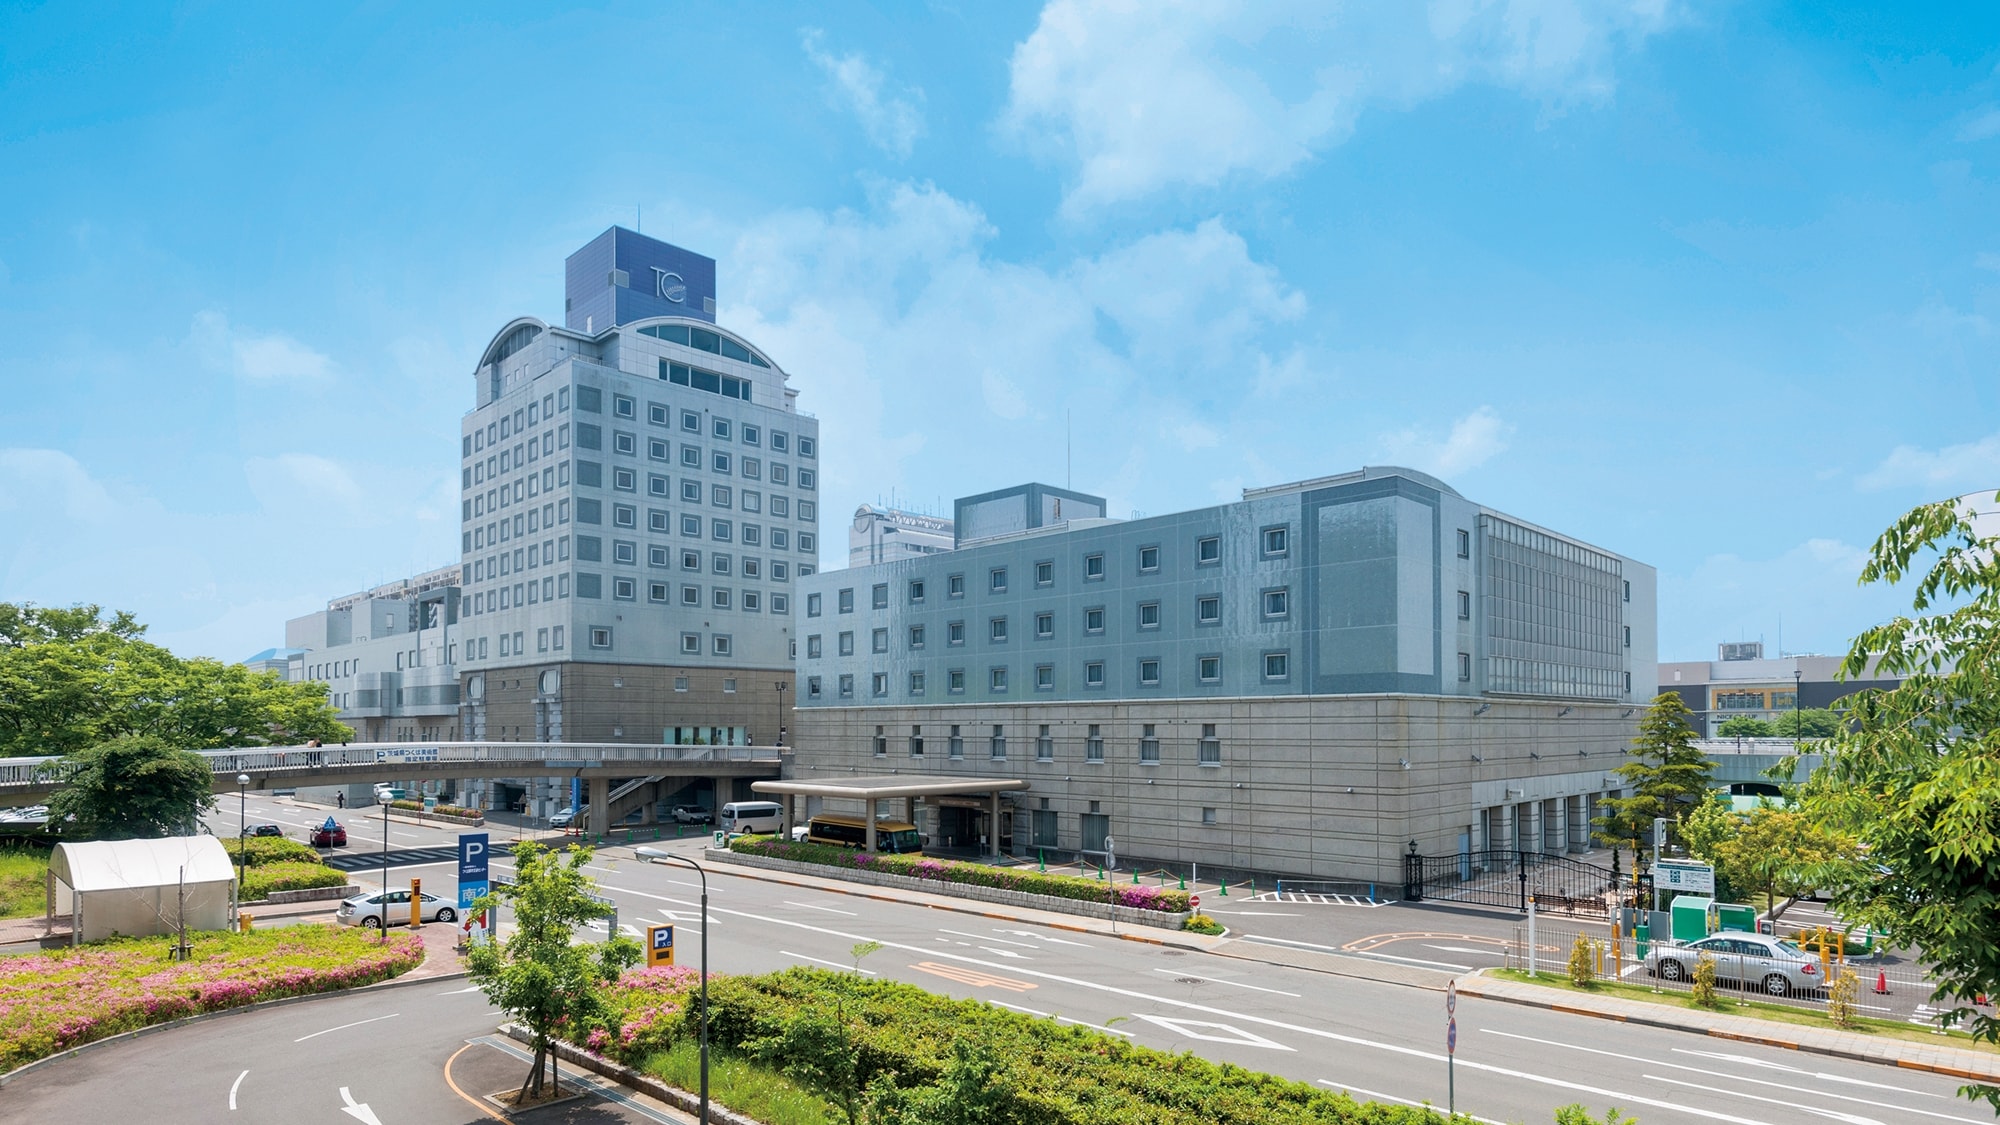 Hotel Nikko Tsukuba (a good location, a 2-minute walk from Exit A3 of Tsukuba Station)